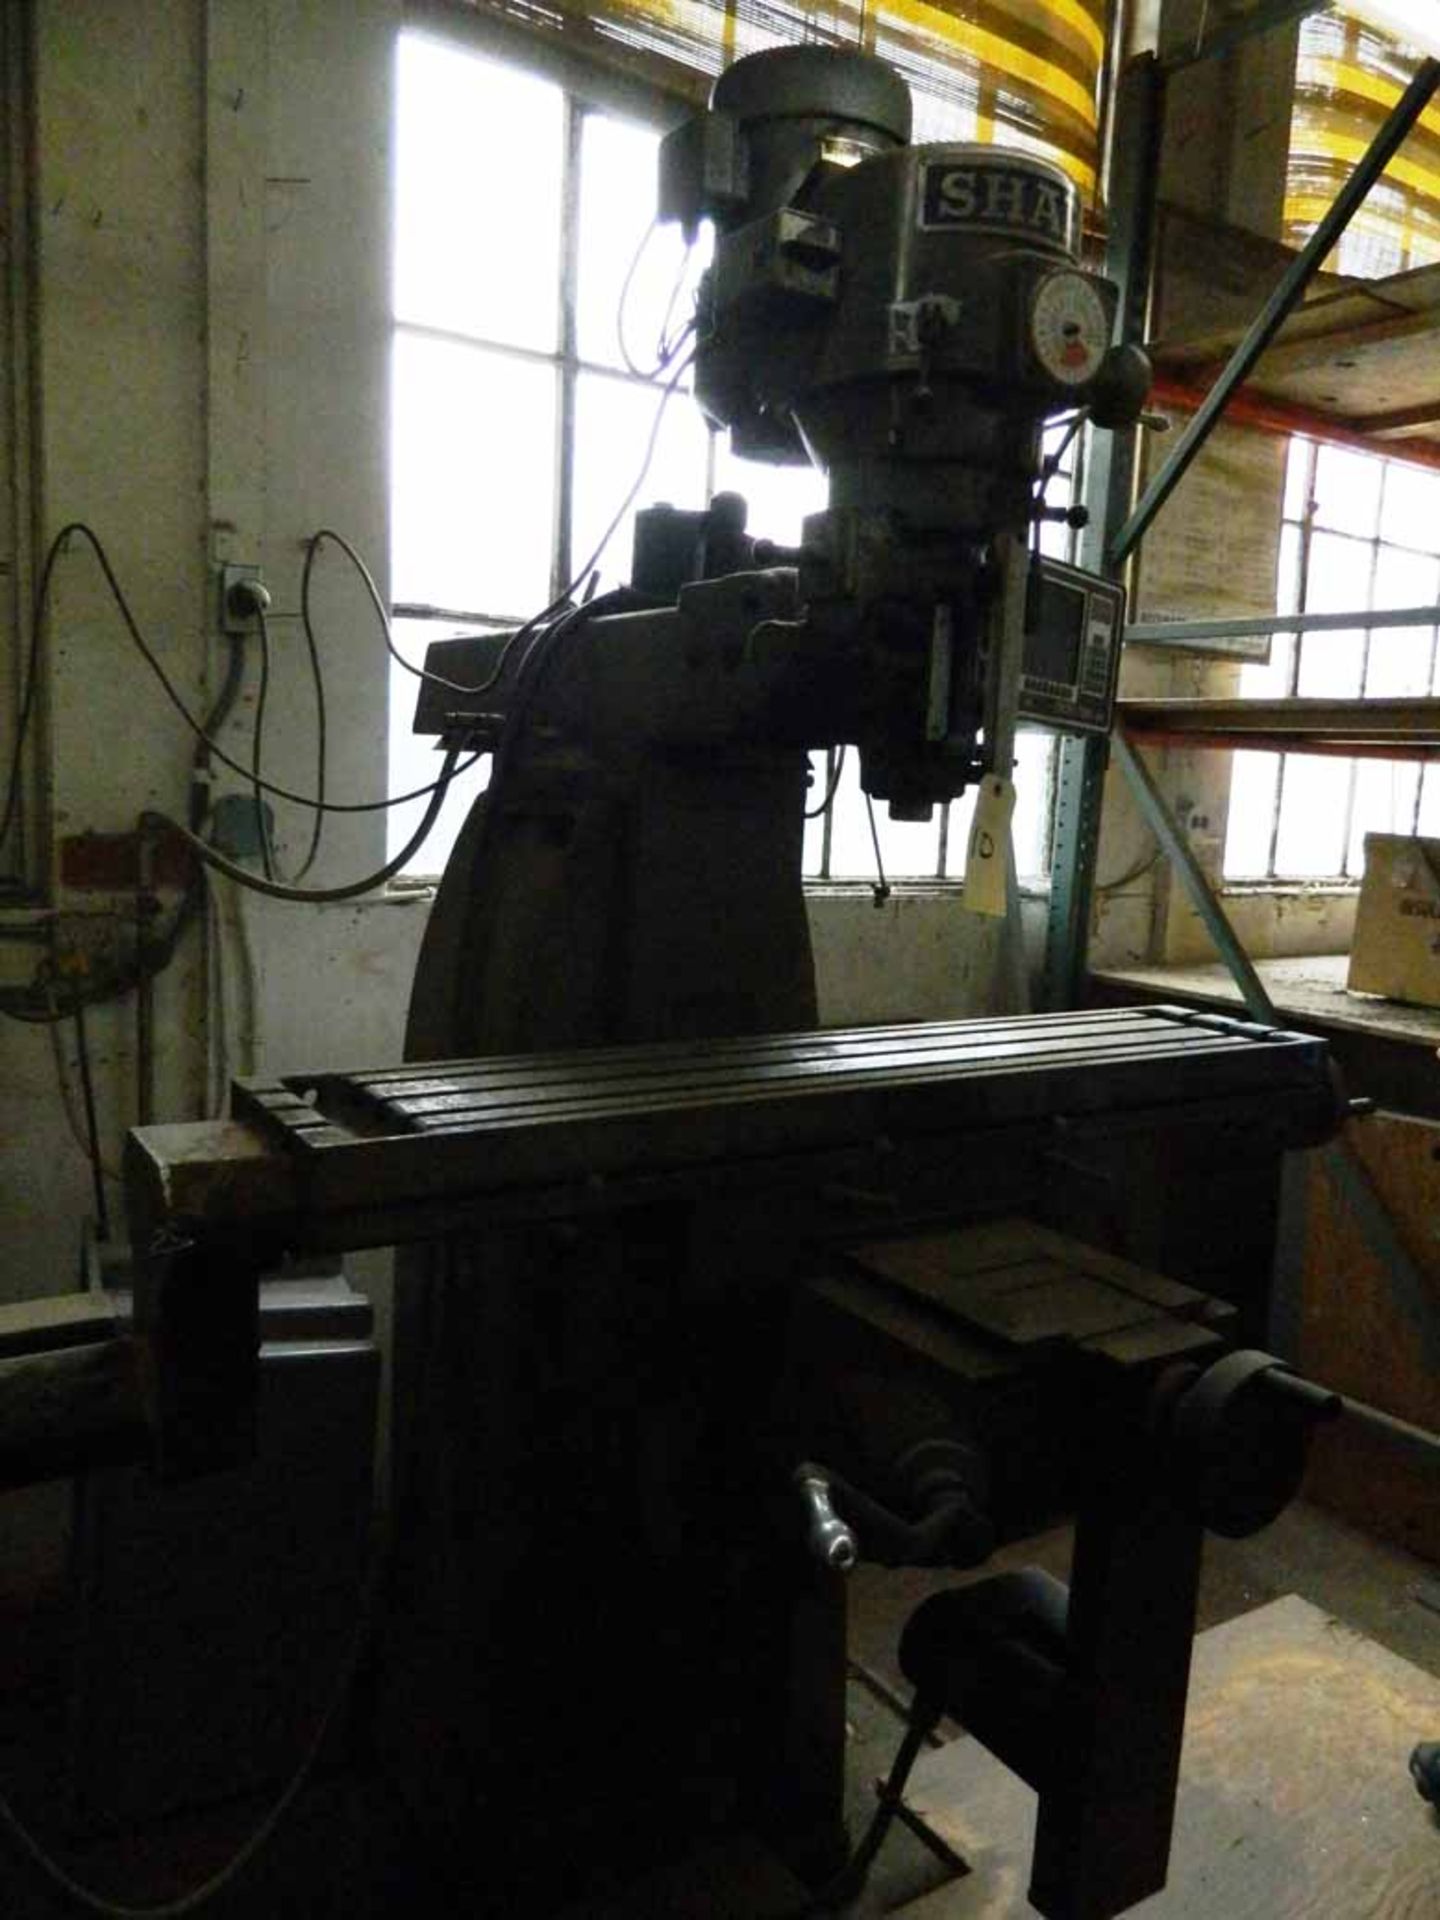 SHARP milling machine (Mill works great) Screen is light Digital Read Out does not work